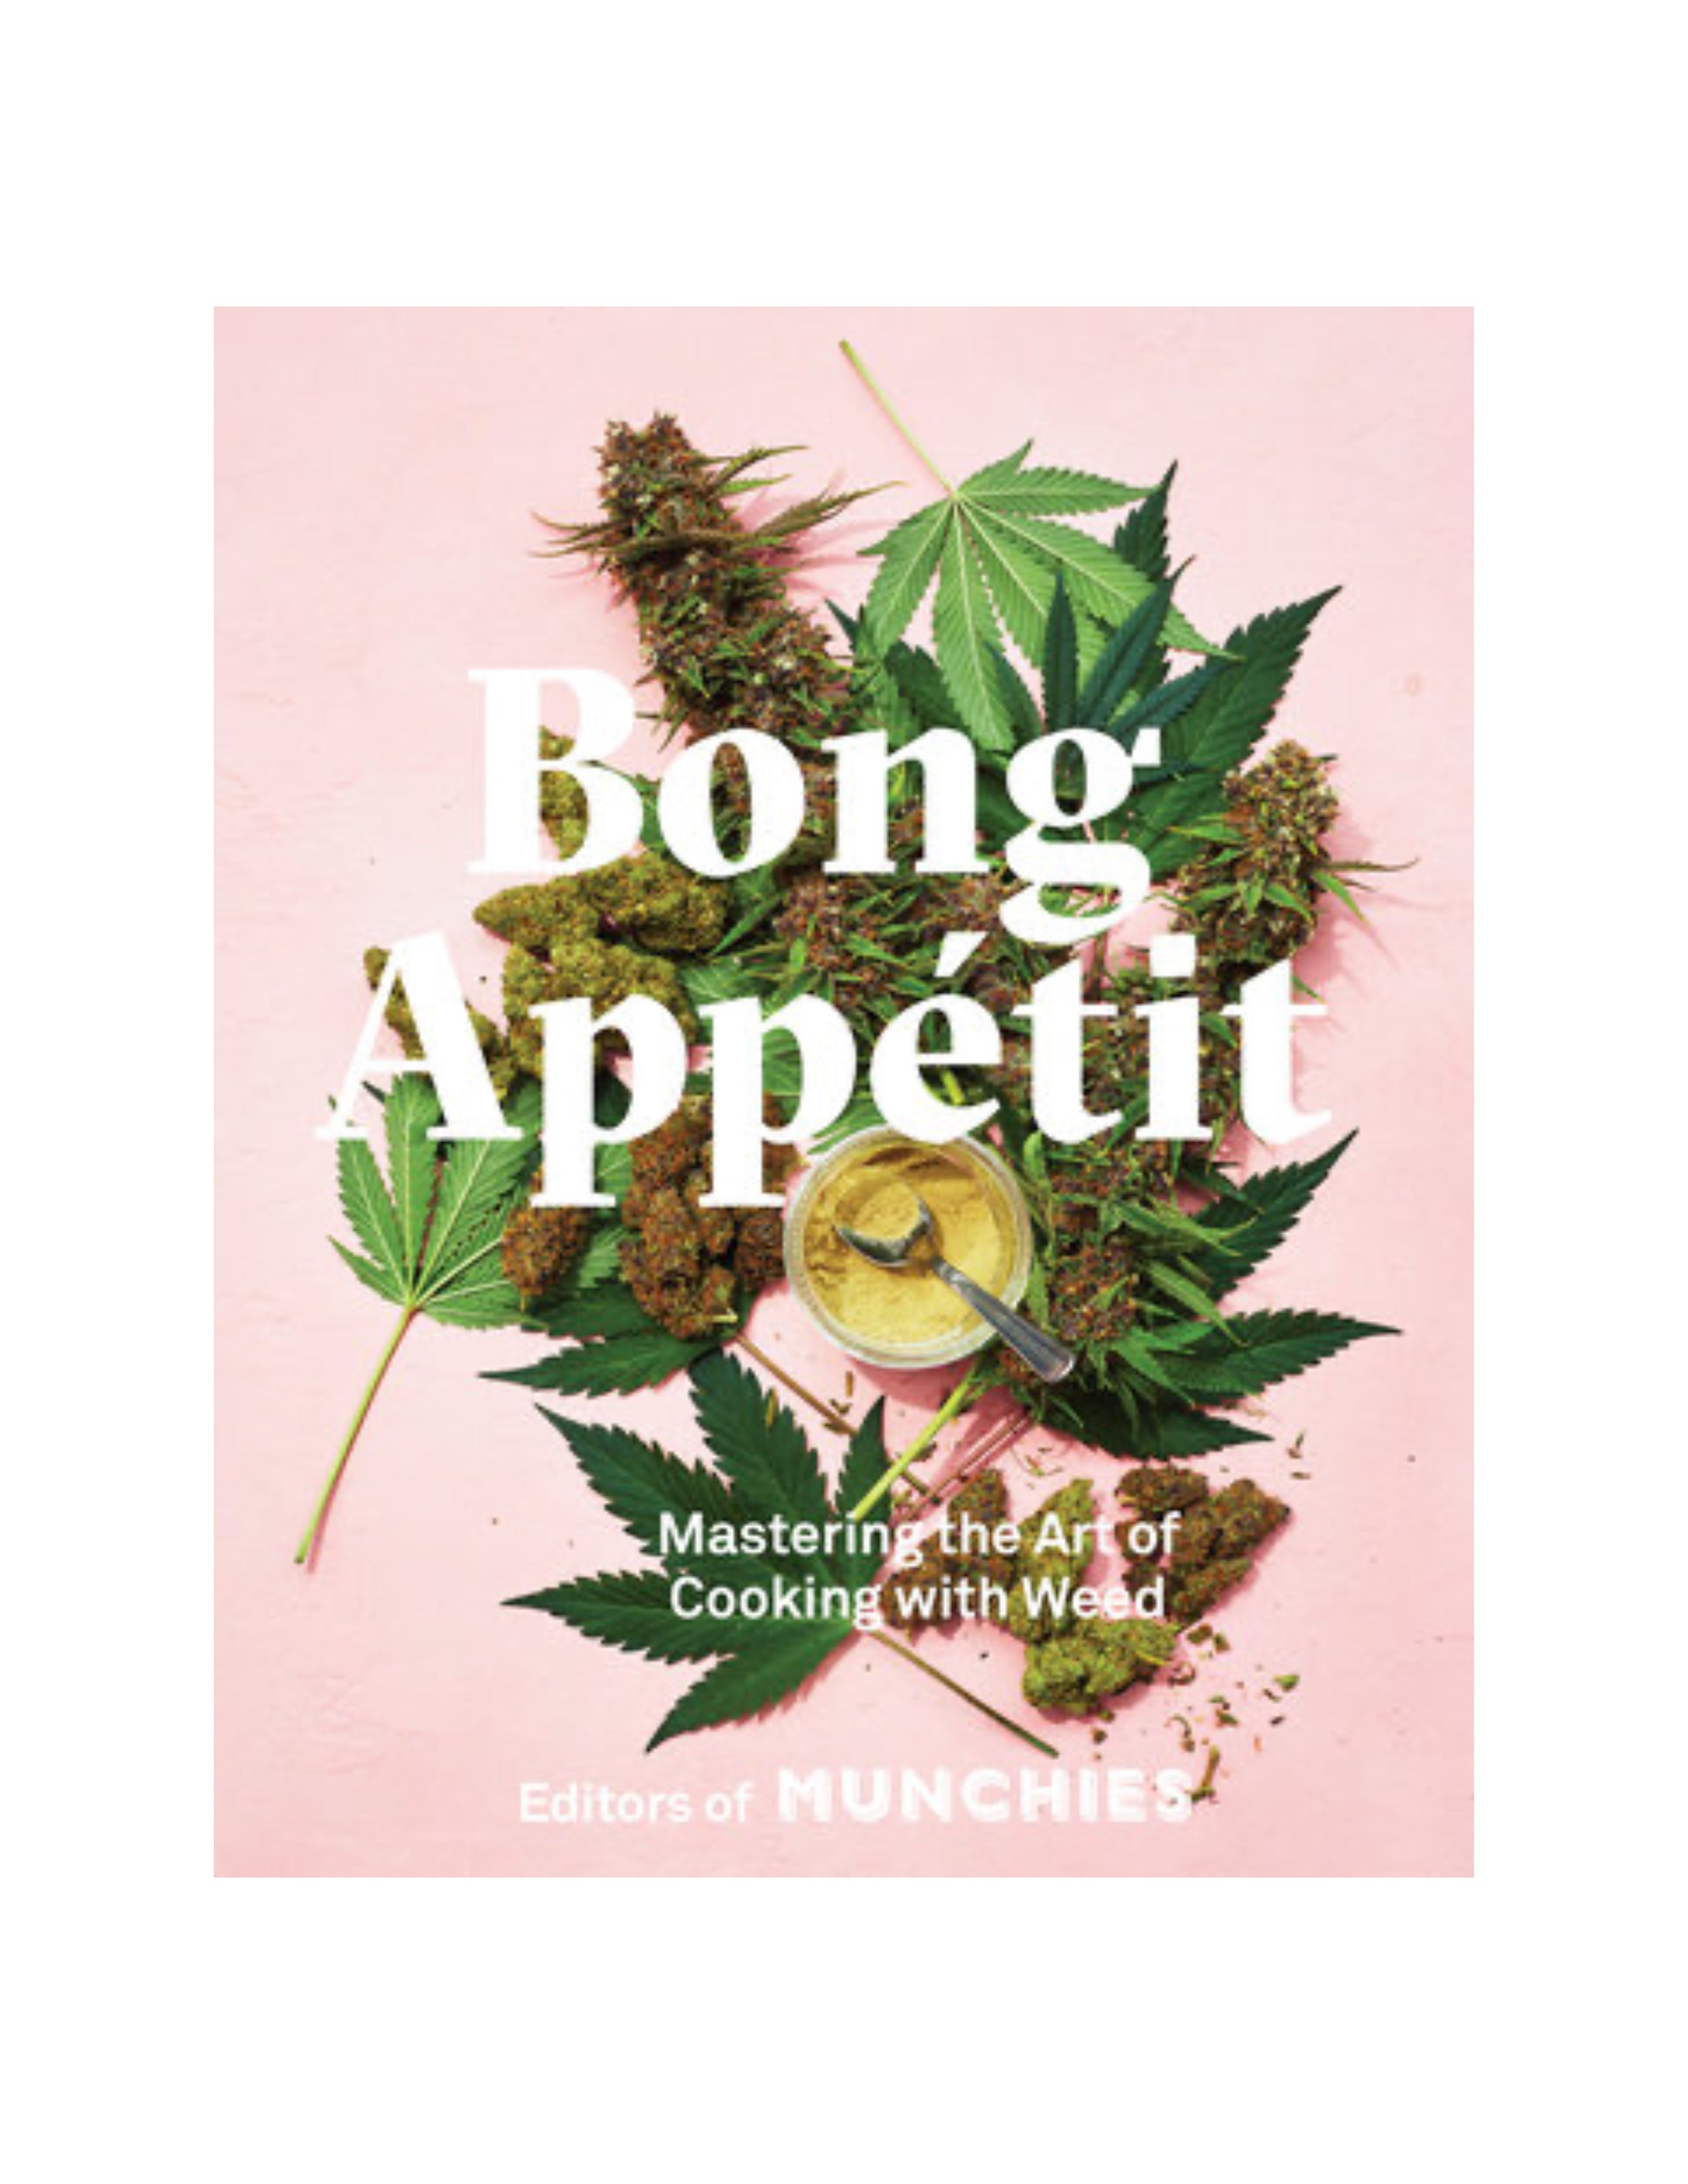 Bong Appétit Mastering the Art of Cooking with Weed